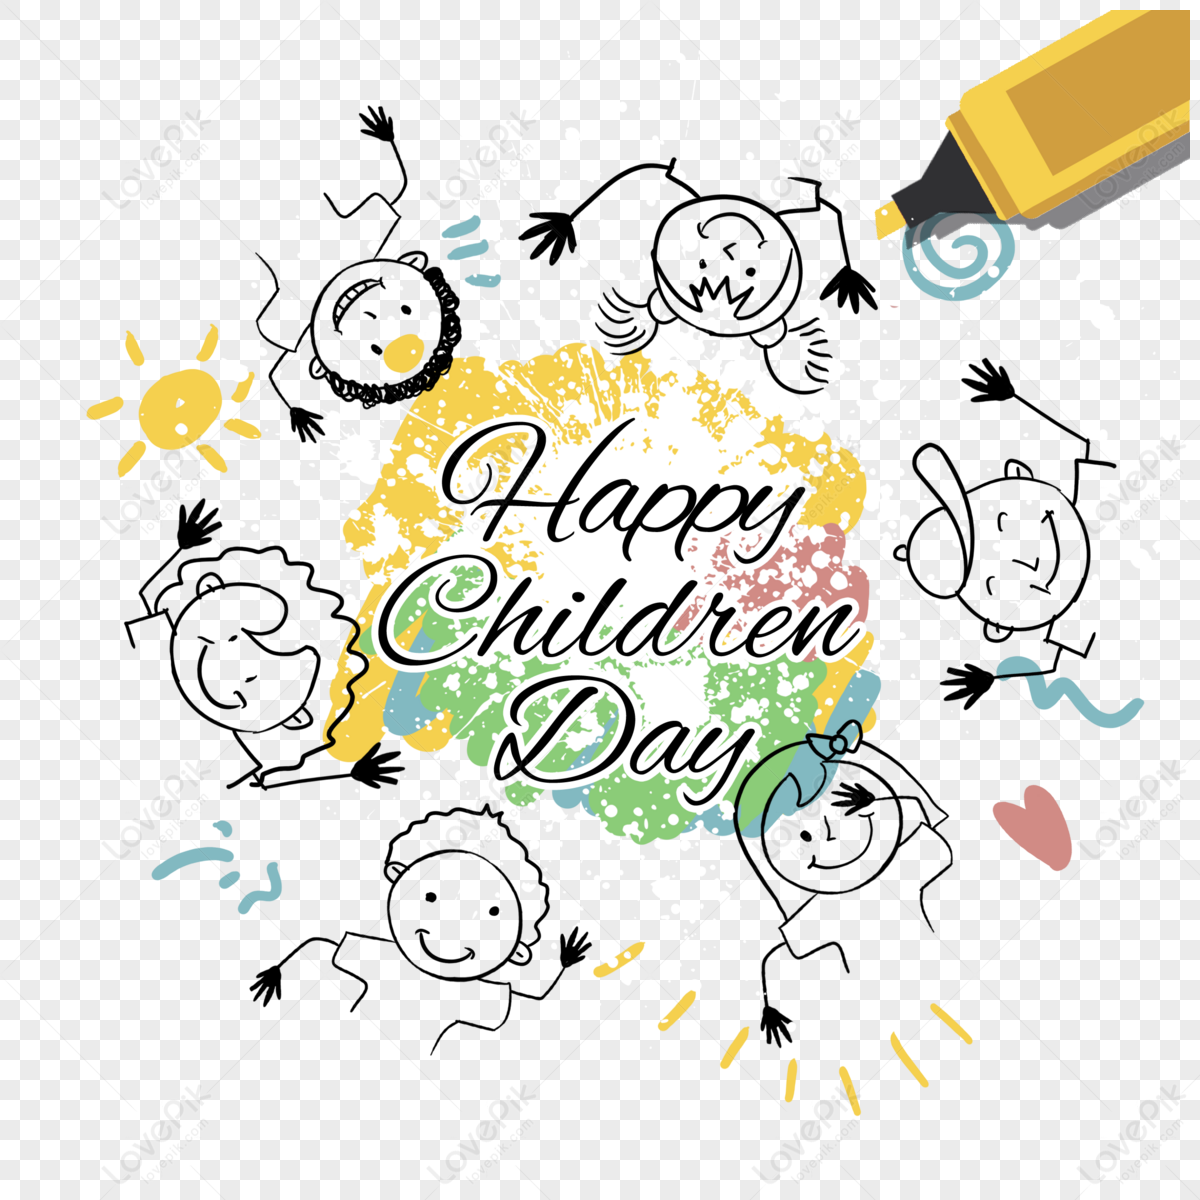 Happy Childrens Day Doodle Holiday Illustration Stock Vector (Royalty Free)  1392264479 | Shutterstock